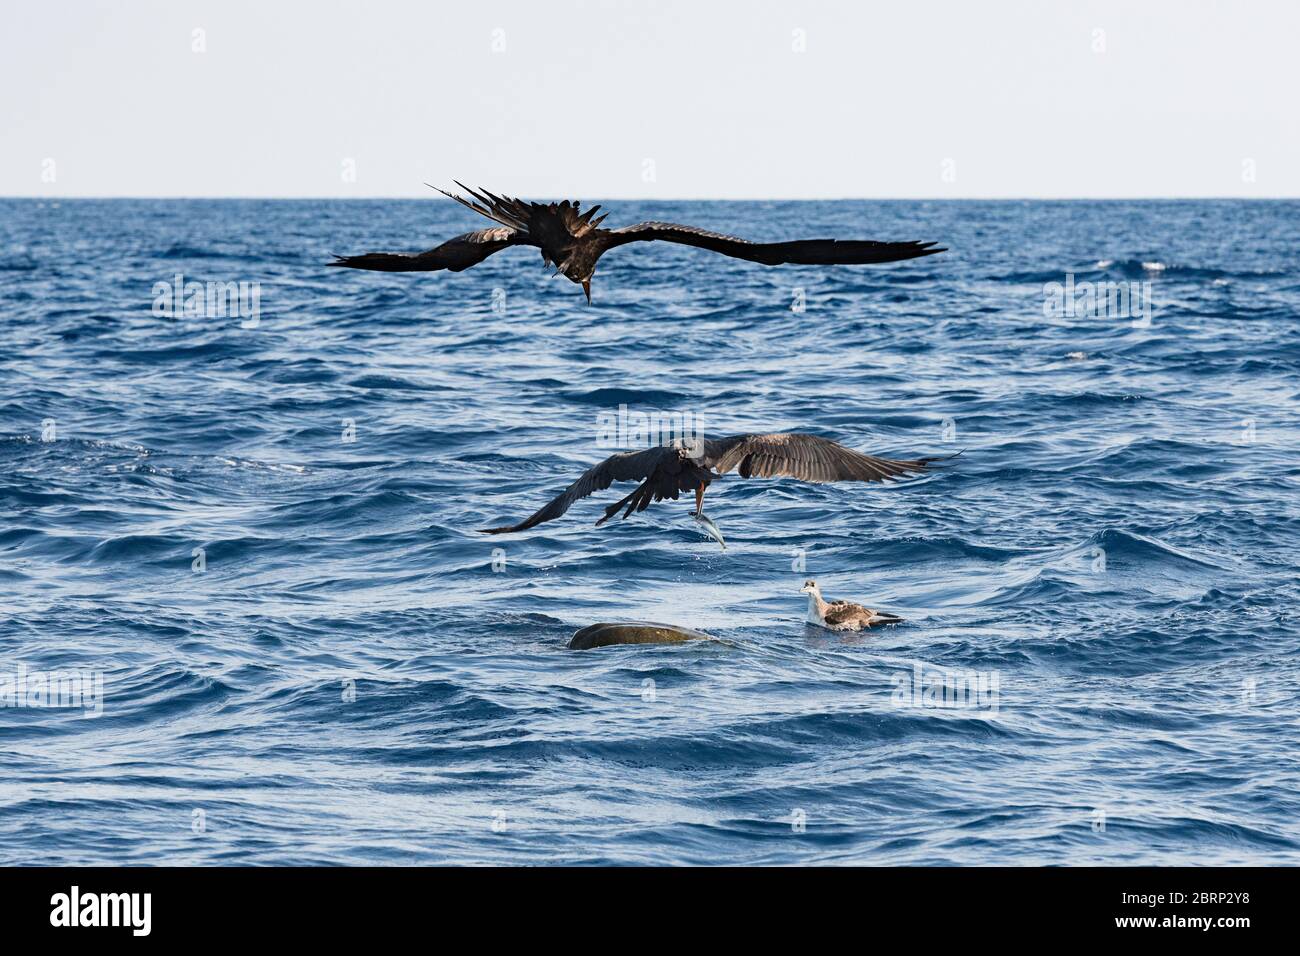 magnificent frigate bird snatches bait fish that was trying to shelter under an olive ridley sea turtle floating at the surface, offshore Costa Rica Stock Photo